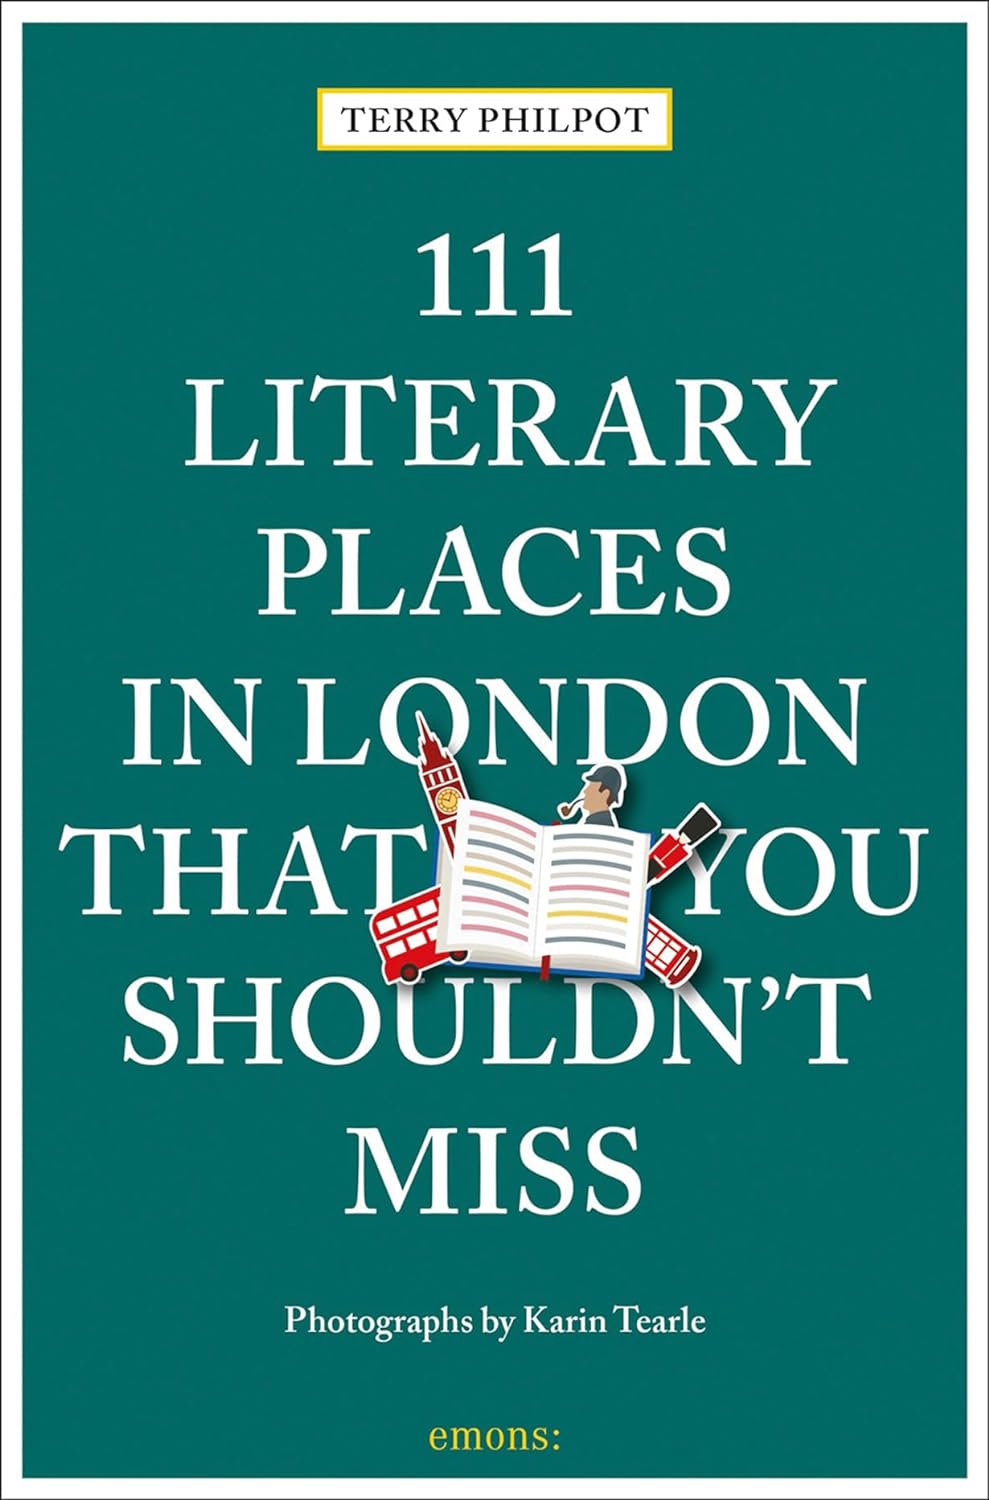 Online bestellen: Reisgids 111 places in Literary Places in London That You Shouldn't Miss | Emons